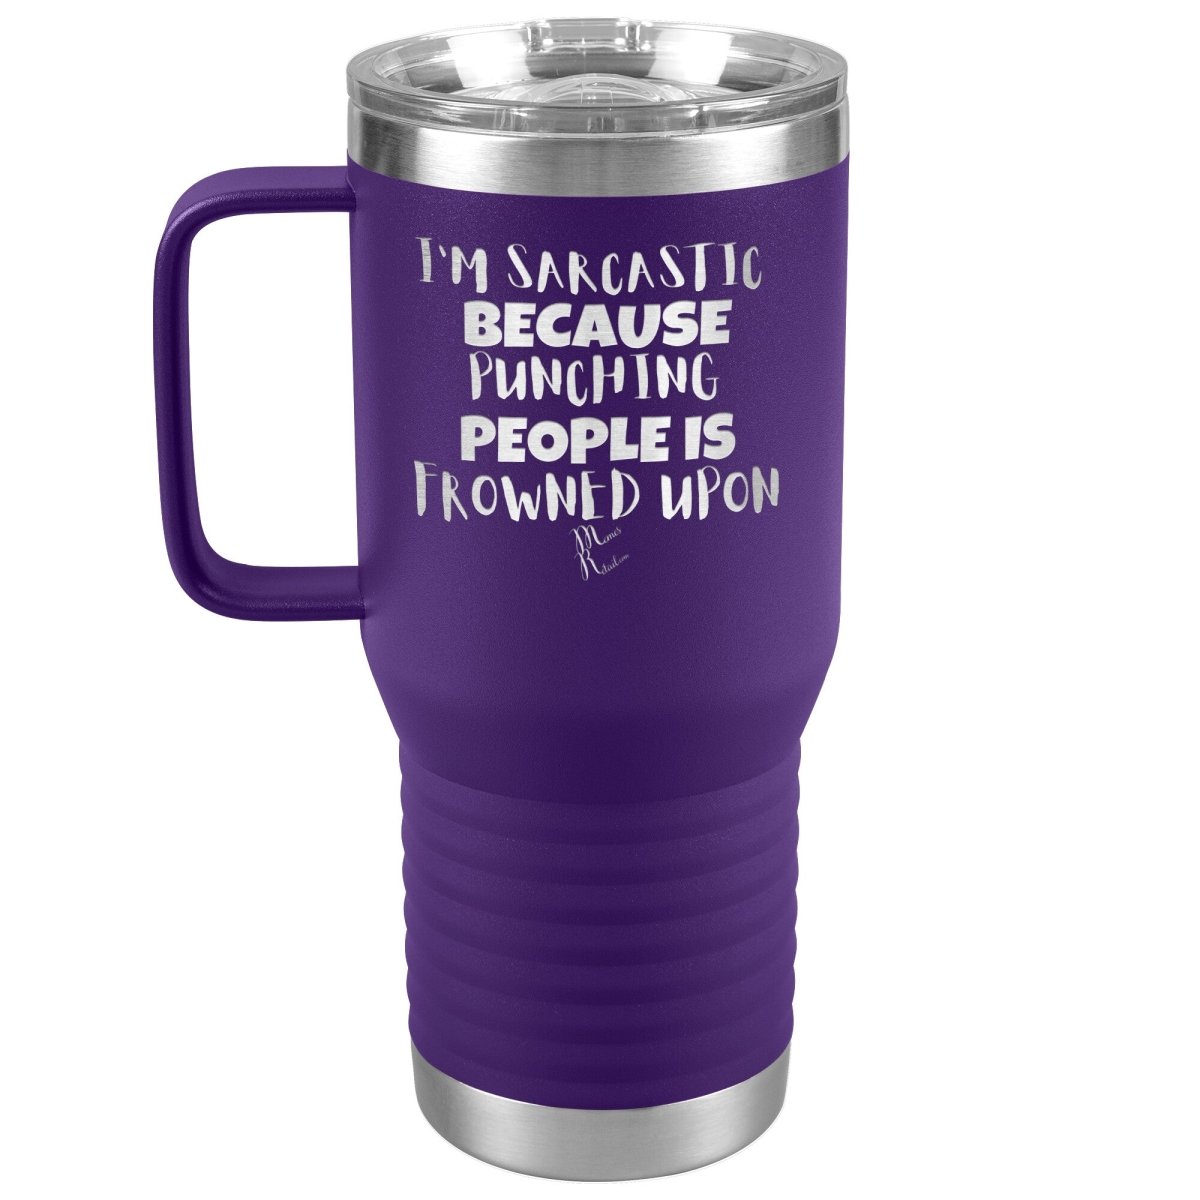 I'm Sarcastic Because Punching People is Frowned Upon Tumblers, 20oz Travel Tumbler / Purple - MemesRetail.com